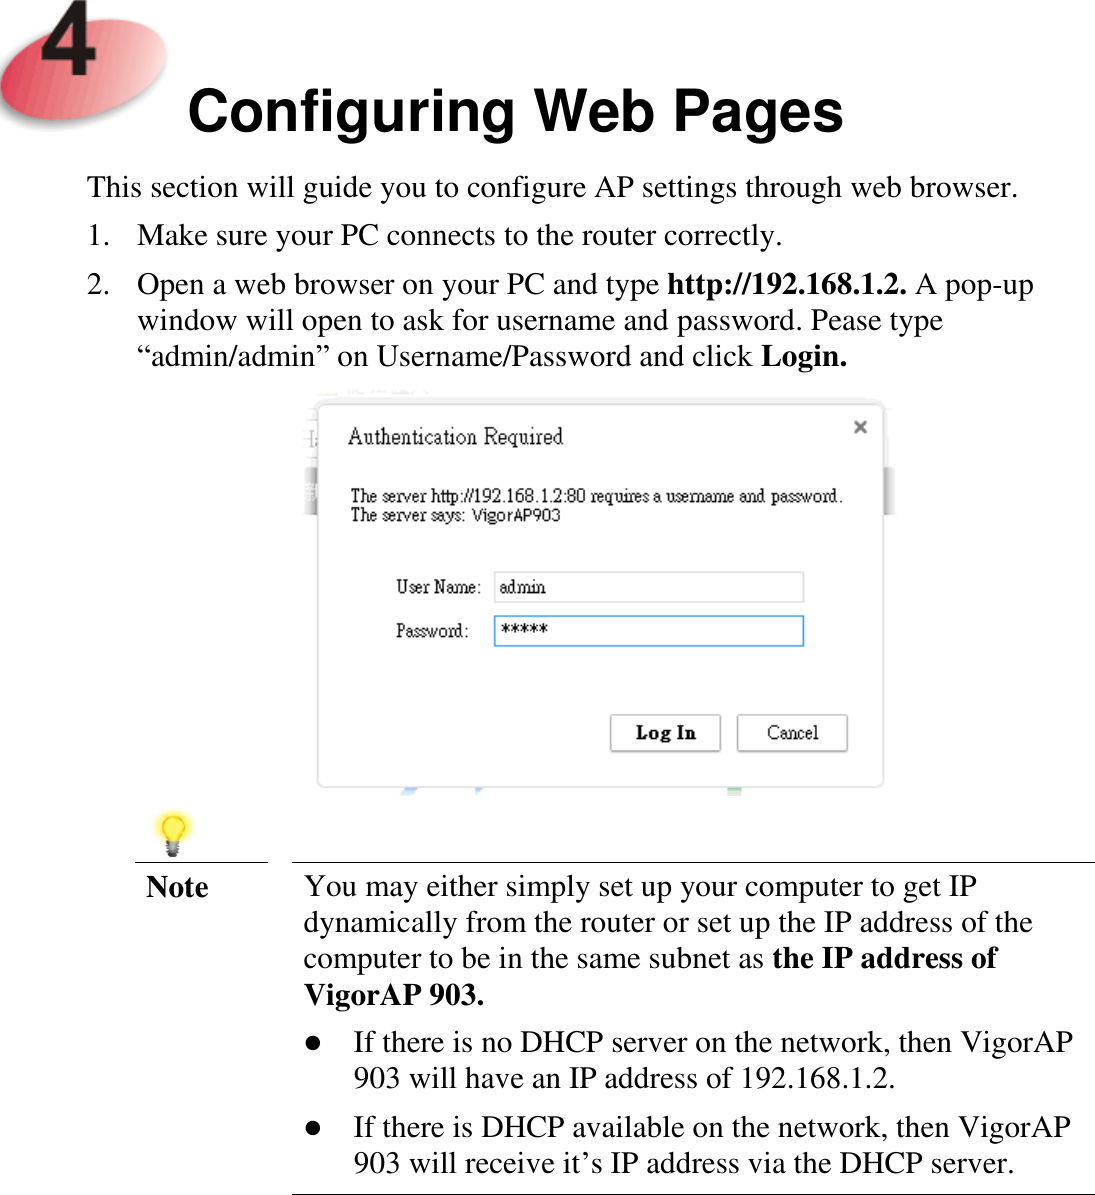     Configuring Web Pages  This section will guide you to configure AP settings through web browser. 1. Make sure your PC connects to the router correctly. 2. Open a web browser on your PC and type http://192.168.1.2. A pop-up window will open to ask for username and password. Pease type “admin/admin” on Username/Password and click Login.     Note You may either simply set up your computer to get IP dynamically from the router or set up the IP address of the computer to be in the same subnet as the IP address of VigorAP 903.  If there is no DHCP server on the network, then VigorAP 903 will have an IP address of 192.168.1.2.  If there is DHCP available on the network, then VigorAP 903 will receive it’s IP address via the DHCP server.     